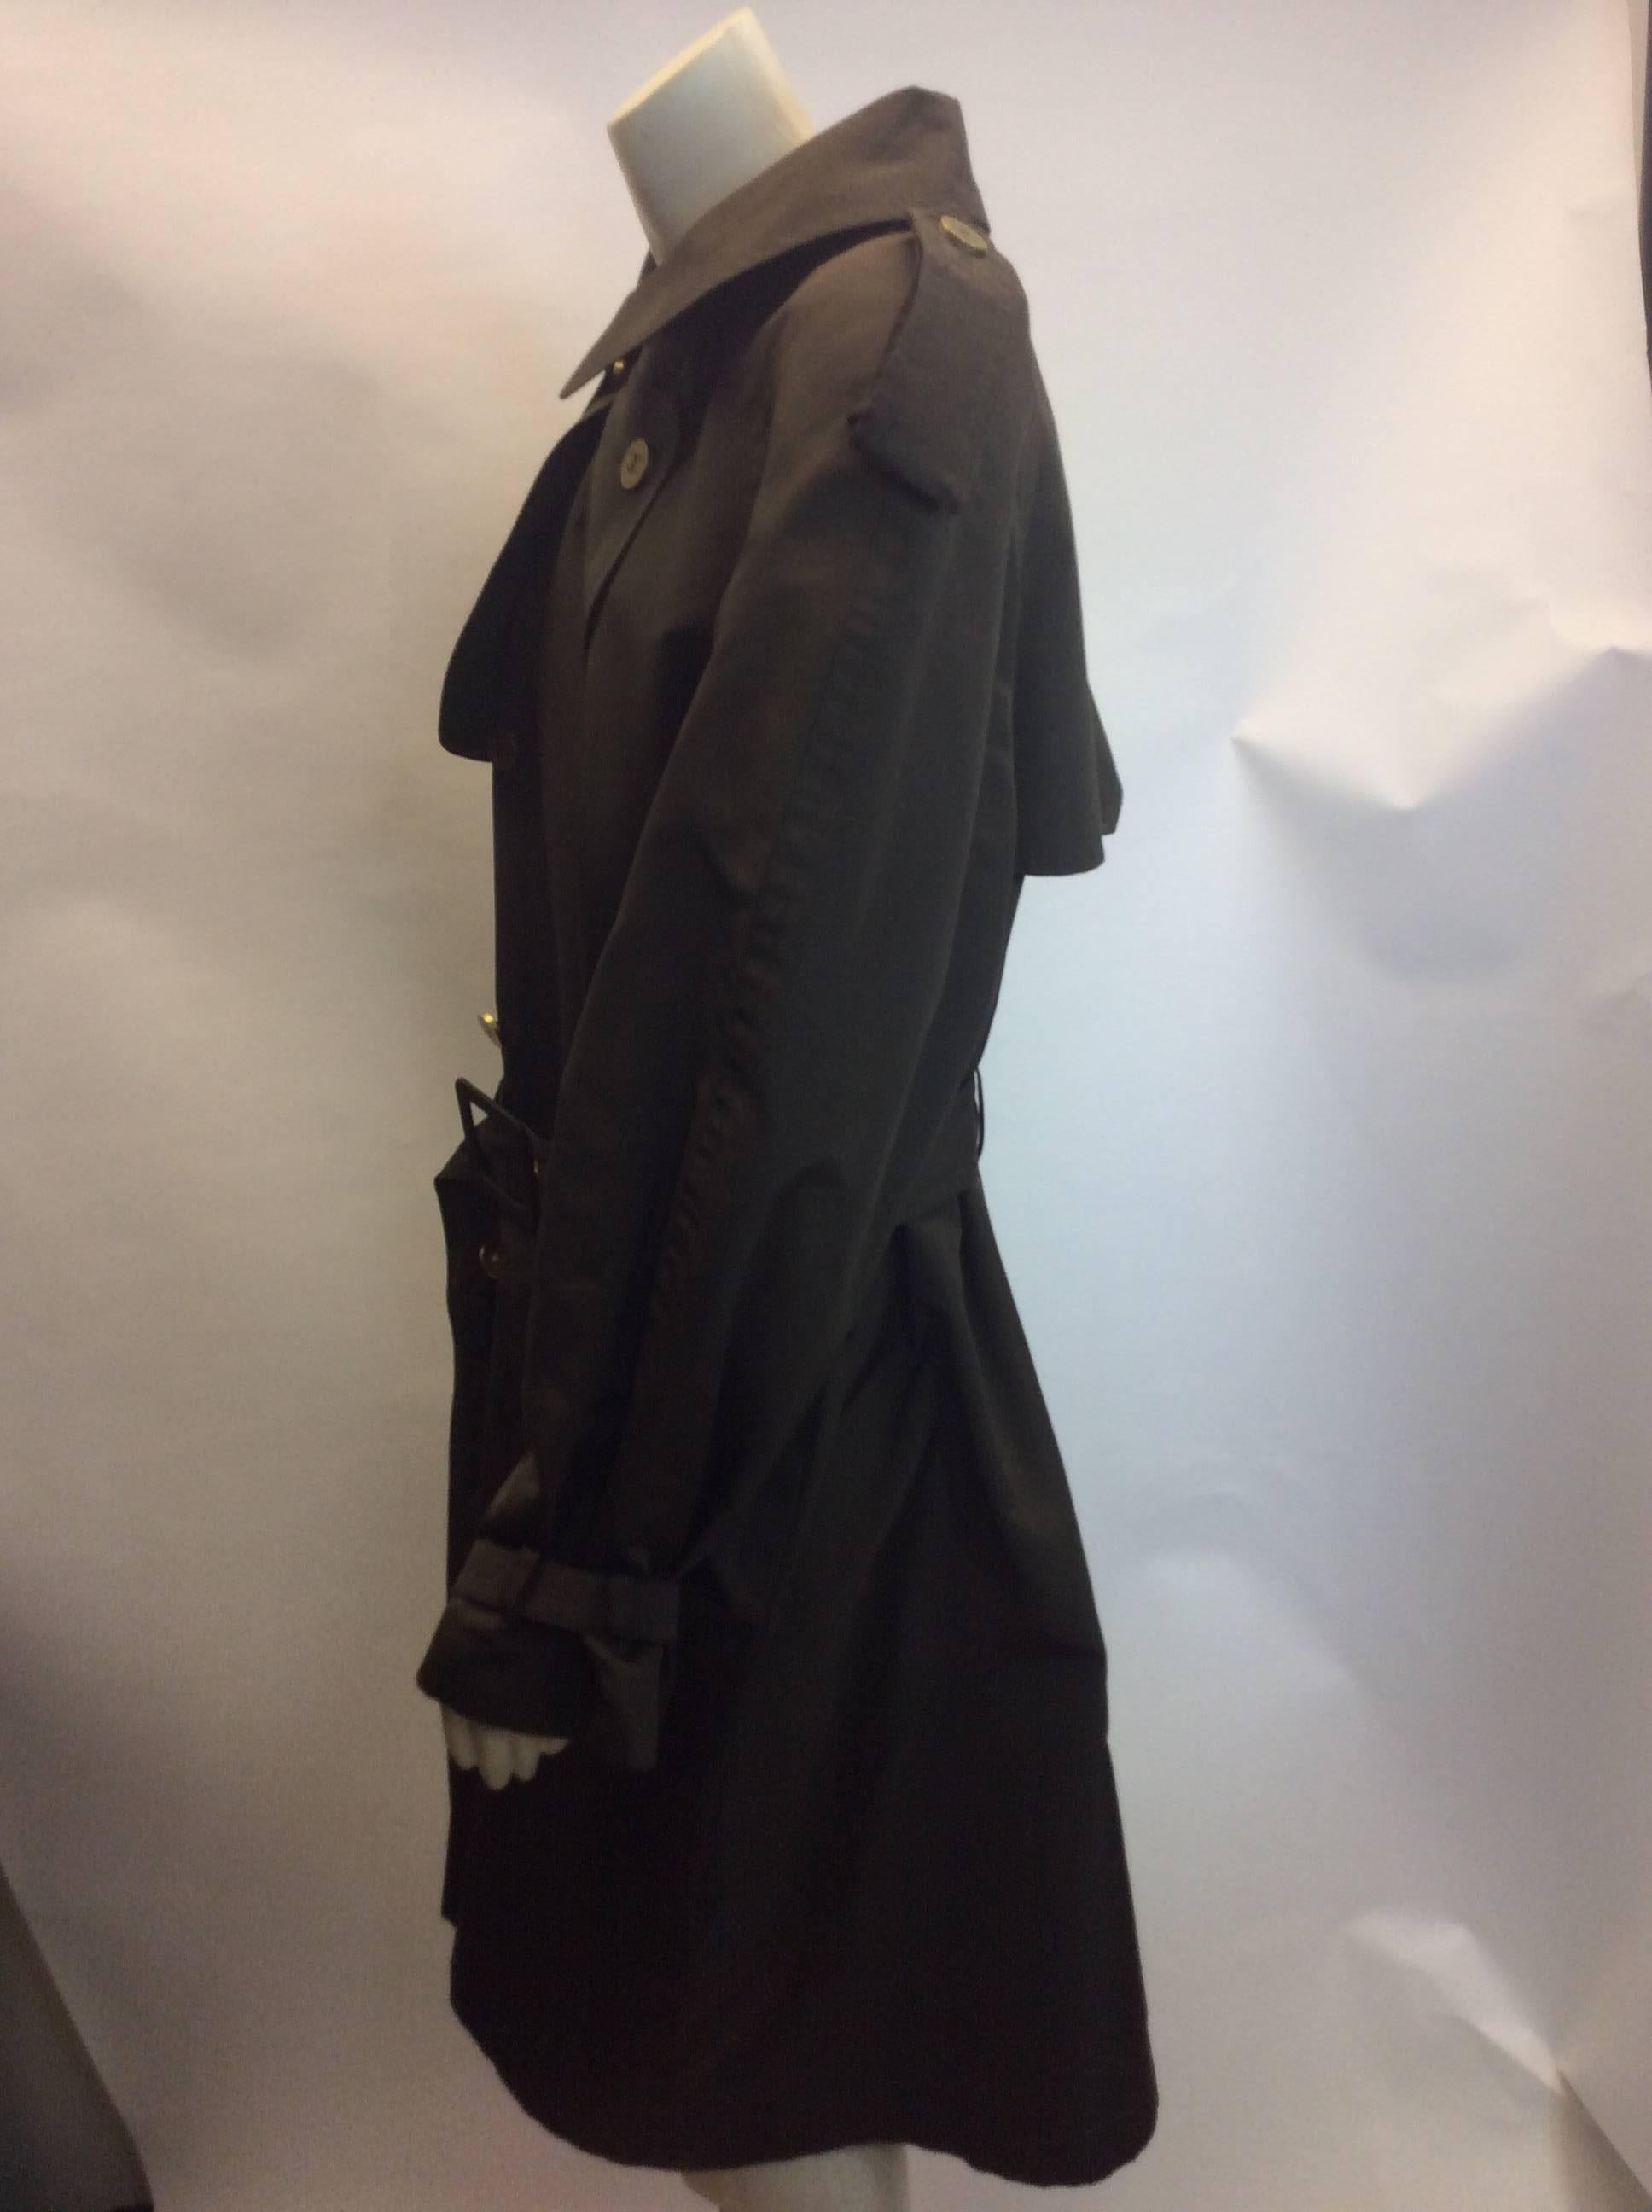 Chanel Boutique Silk Coat In Excellent Condition For Sale In Narberth, PA